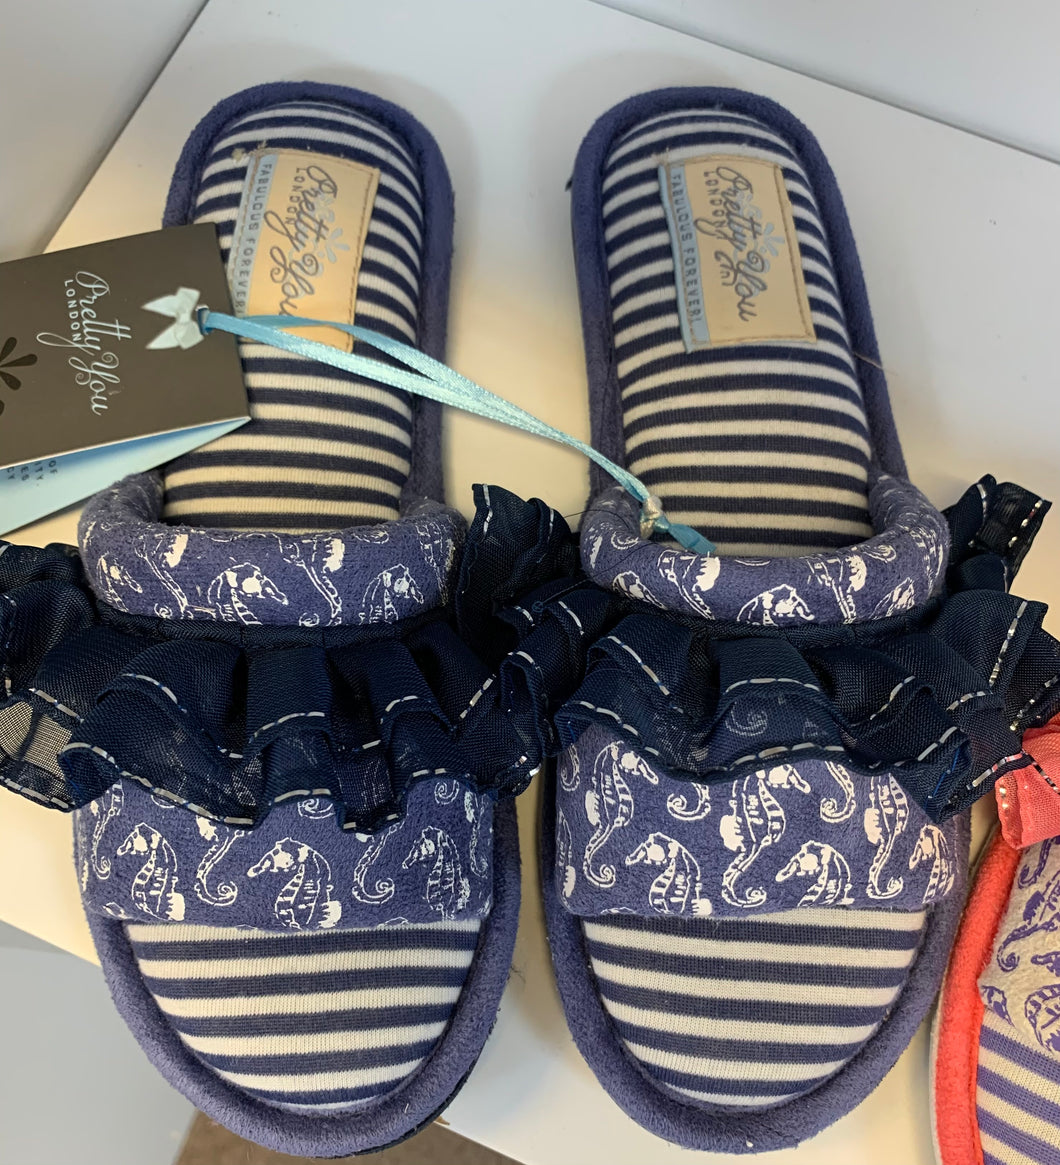 Pretty You Beach Themed Slippers size 5-6 left